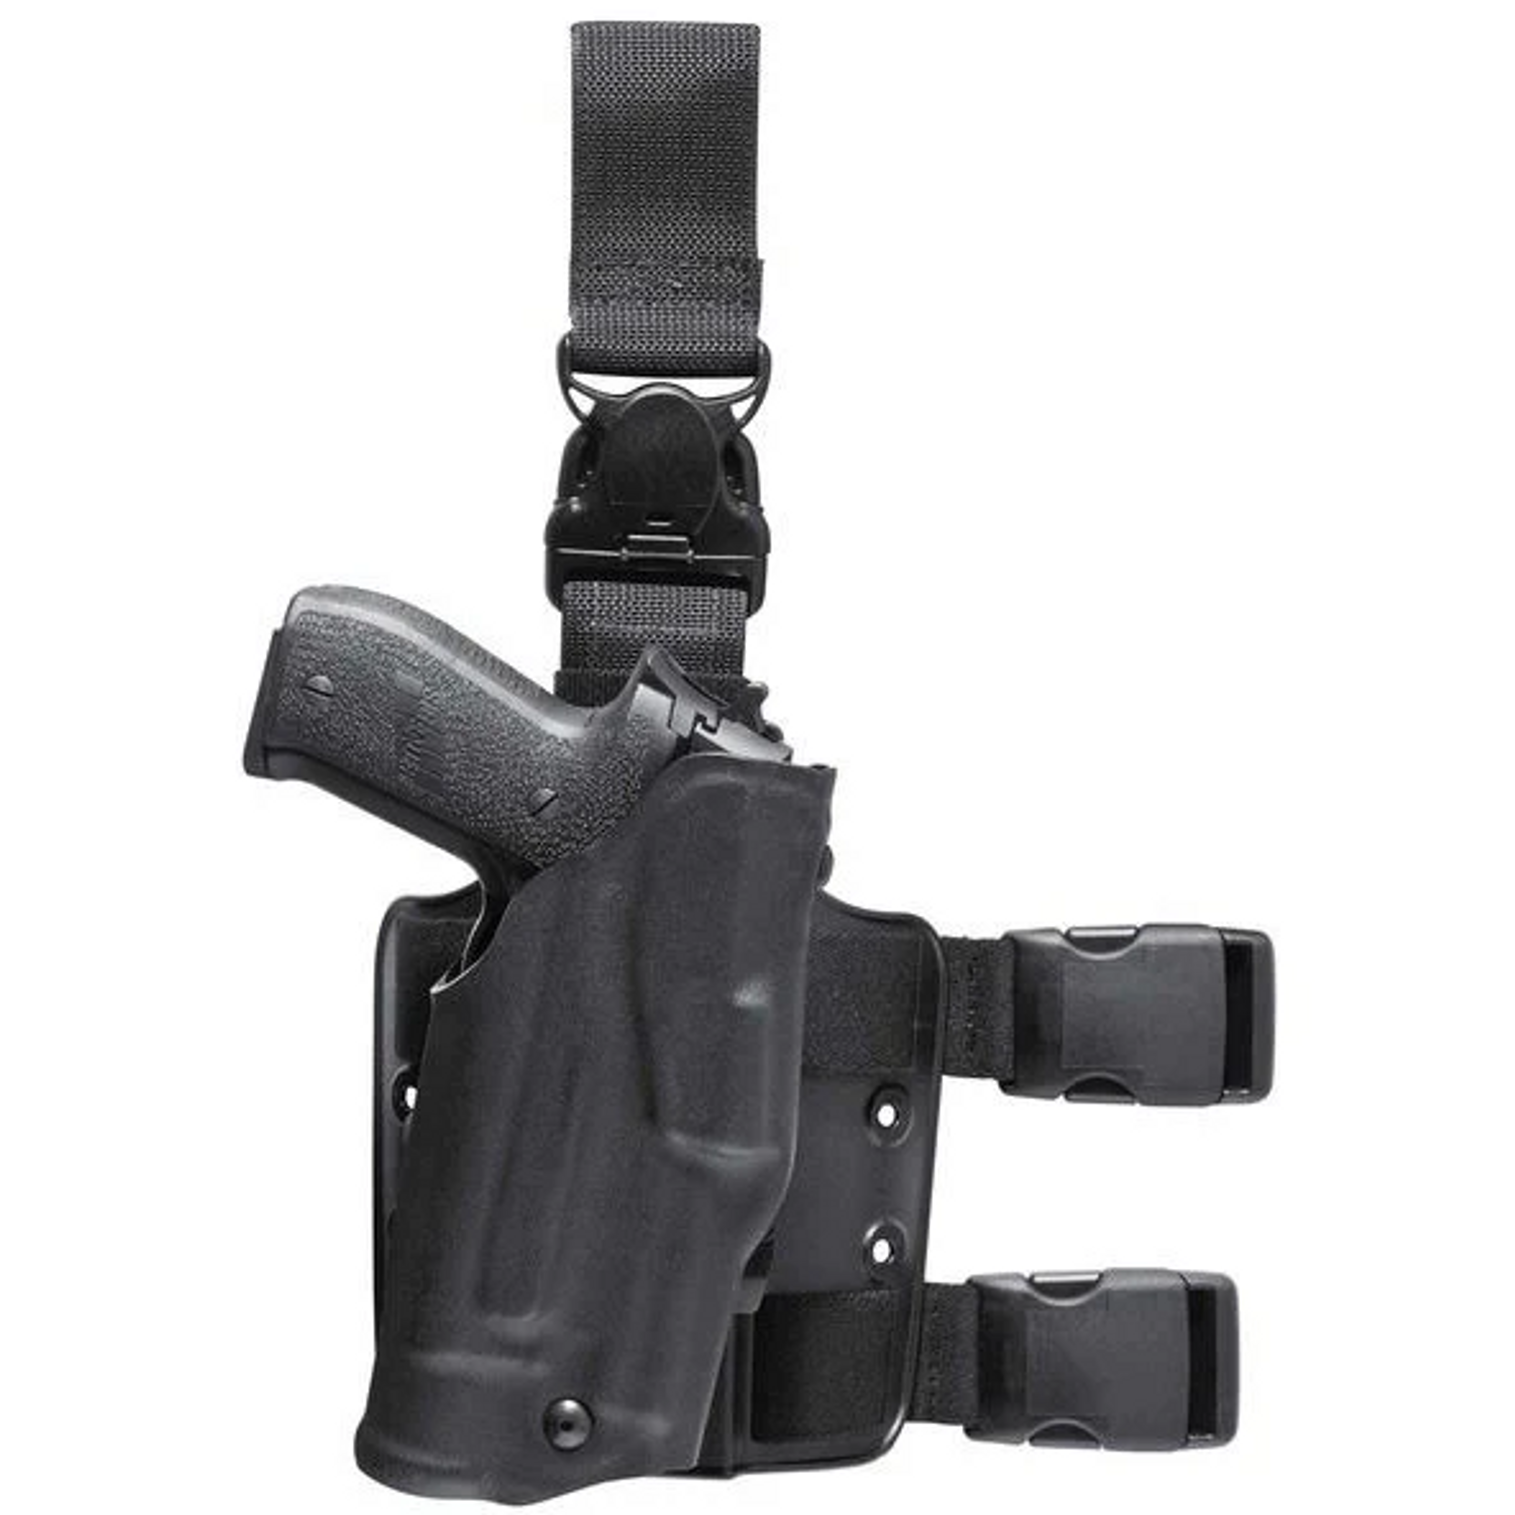 Model 6355 Als Tactical Holster With Quick-release Leg Harness For Glock 34 Gens 1-4 W/ Light